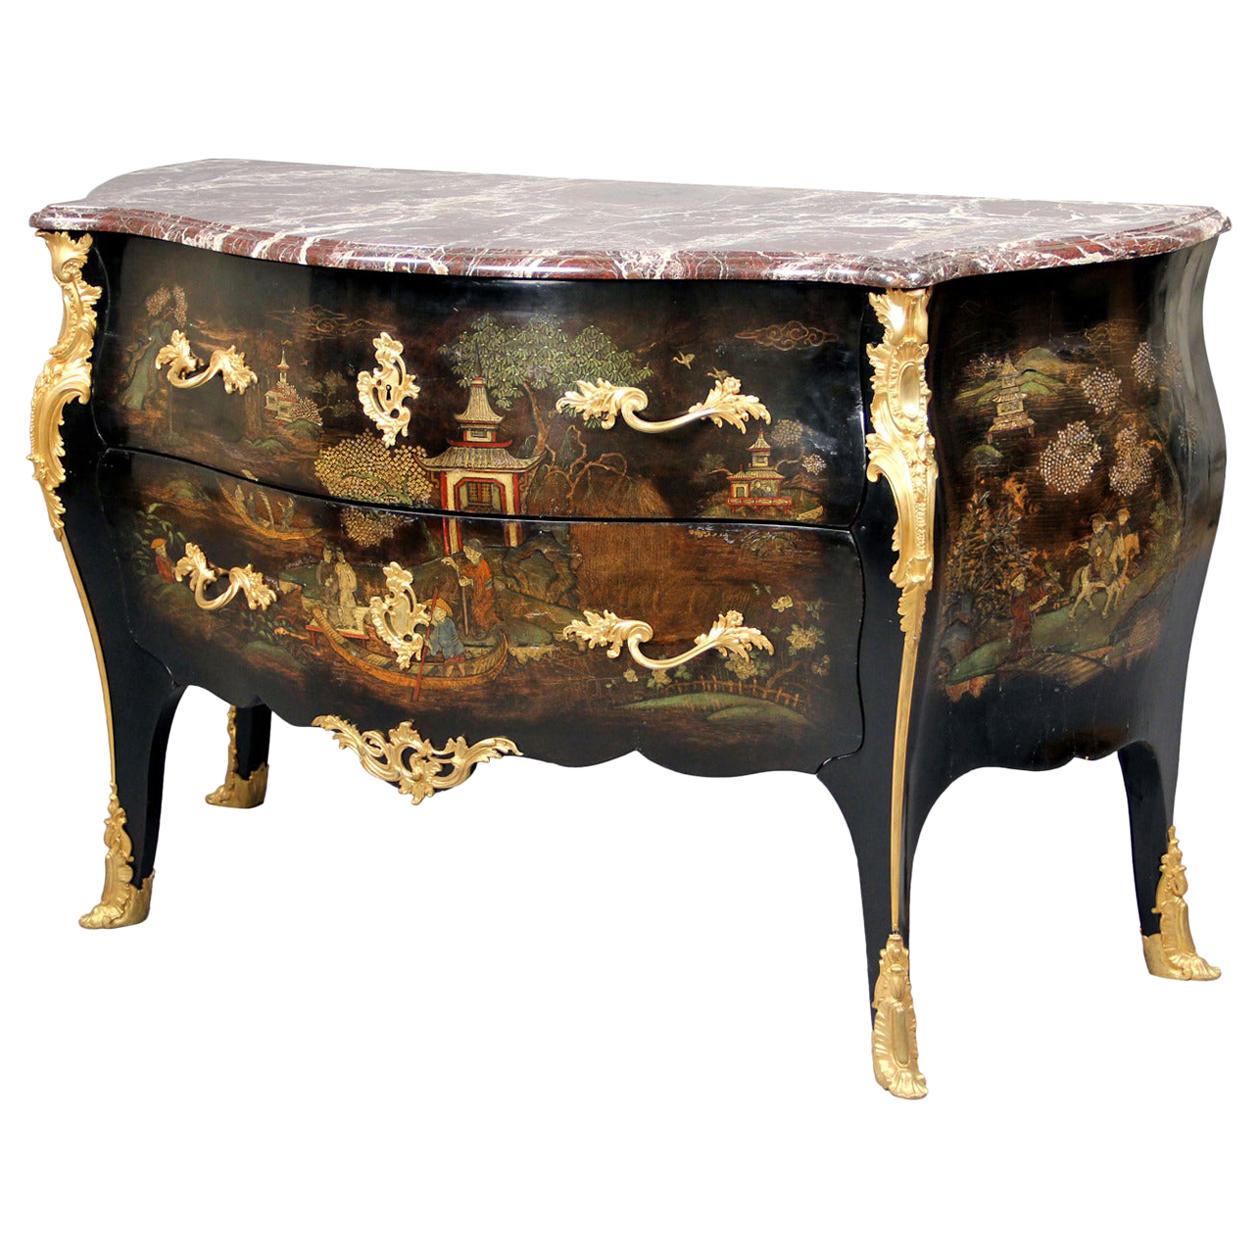 Exceptional Late 19th Century Gilt Bronze-Mounted Lacquer Commode, Henry Dasson